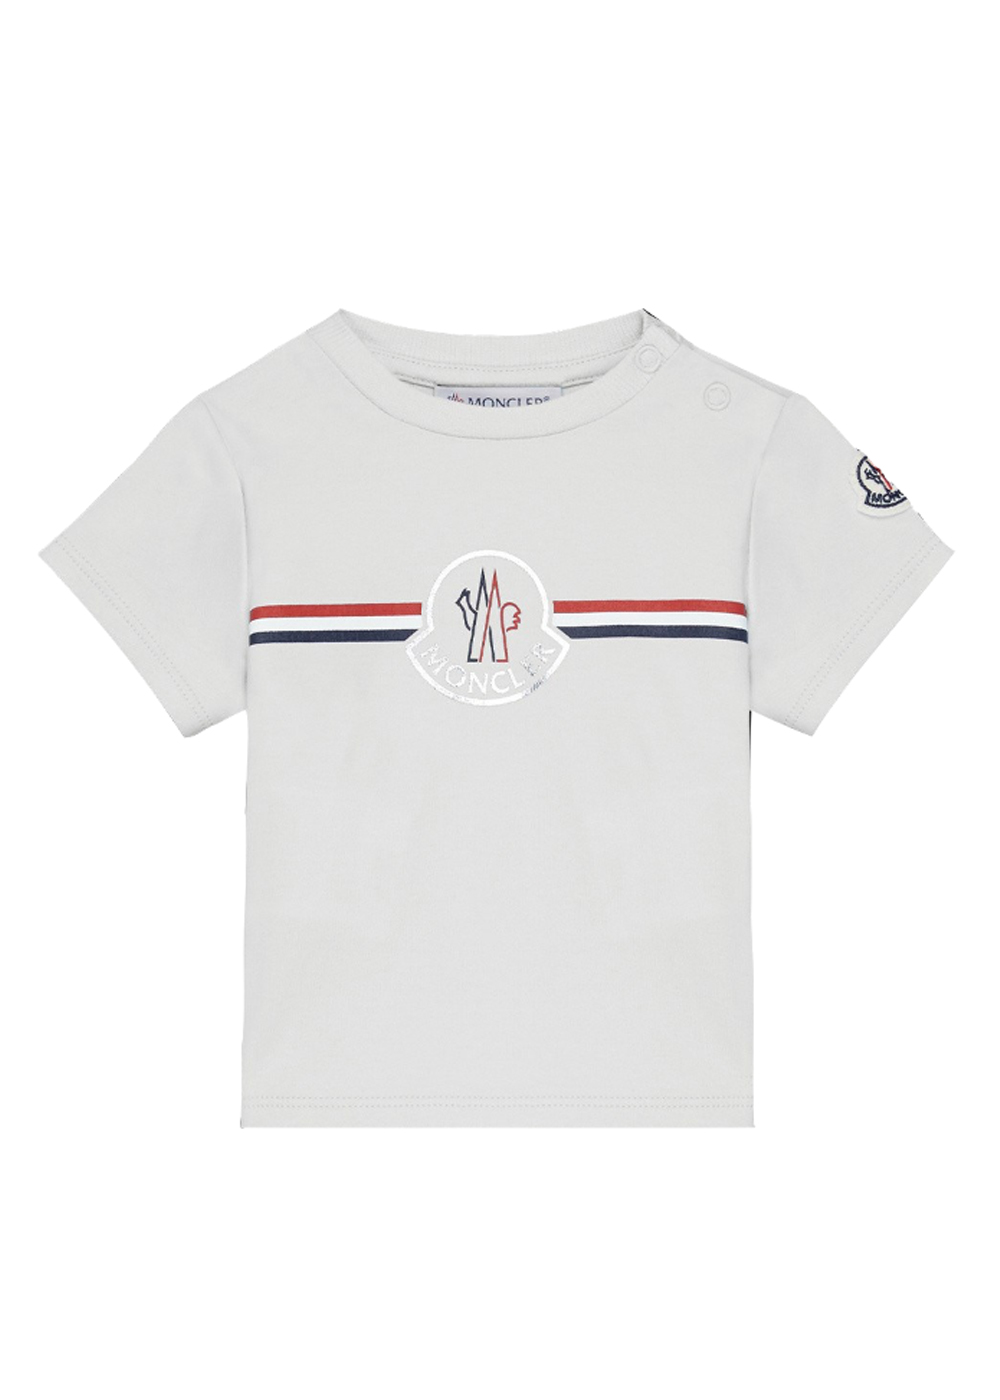 Featured image for “Moncler T-shirt Classic”